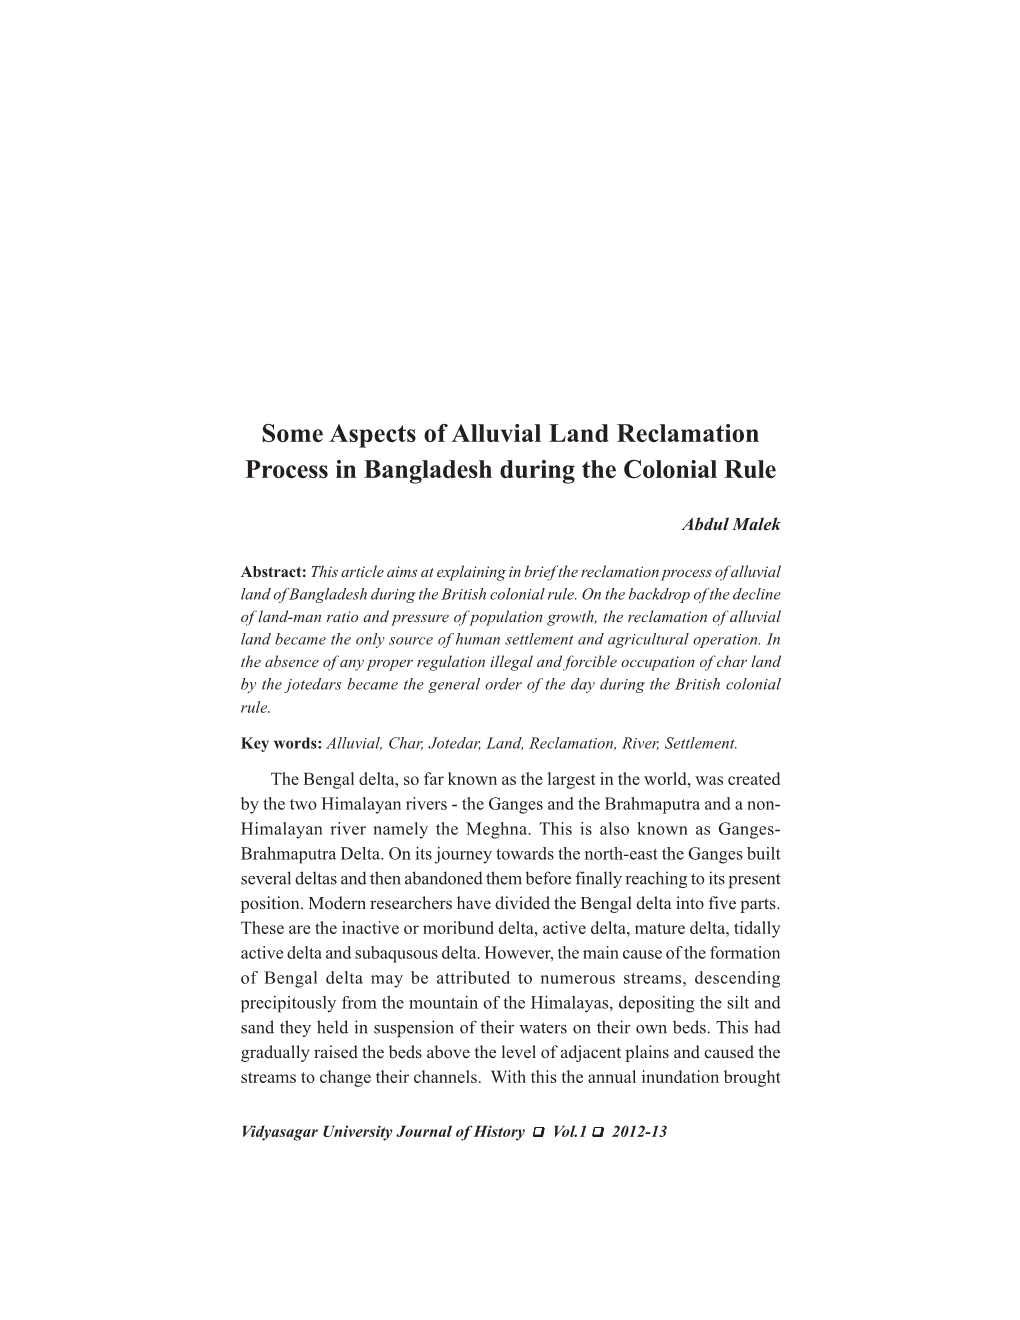 Some Aspects of Alluvial Land Reclamation Process in Bangladesh During the Colonial Rule